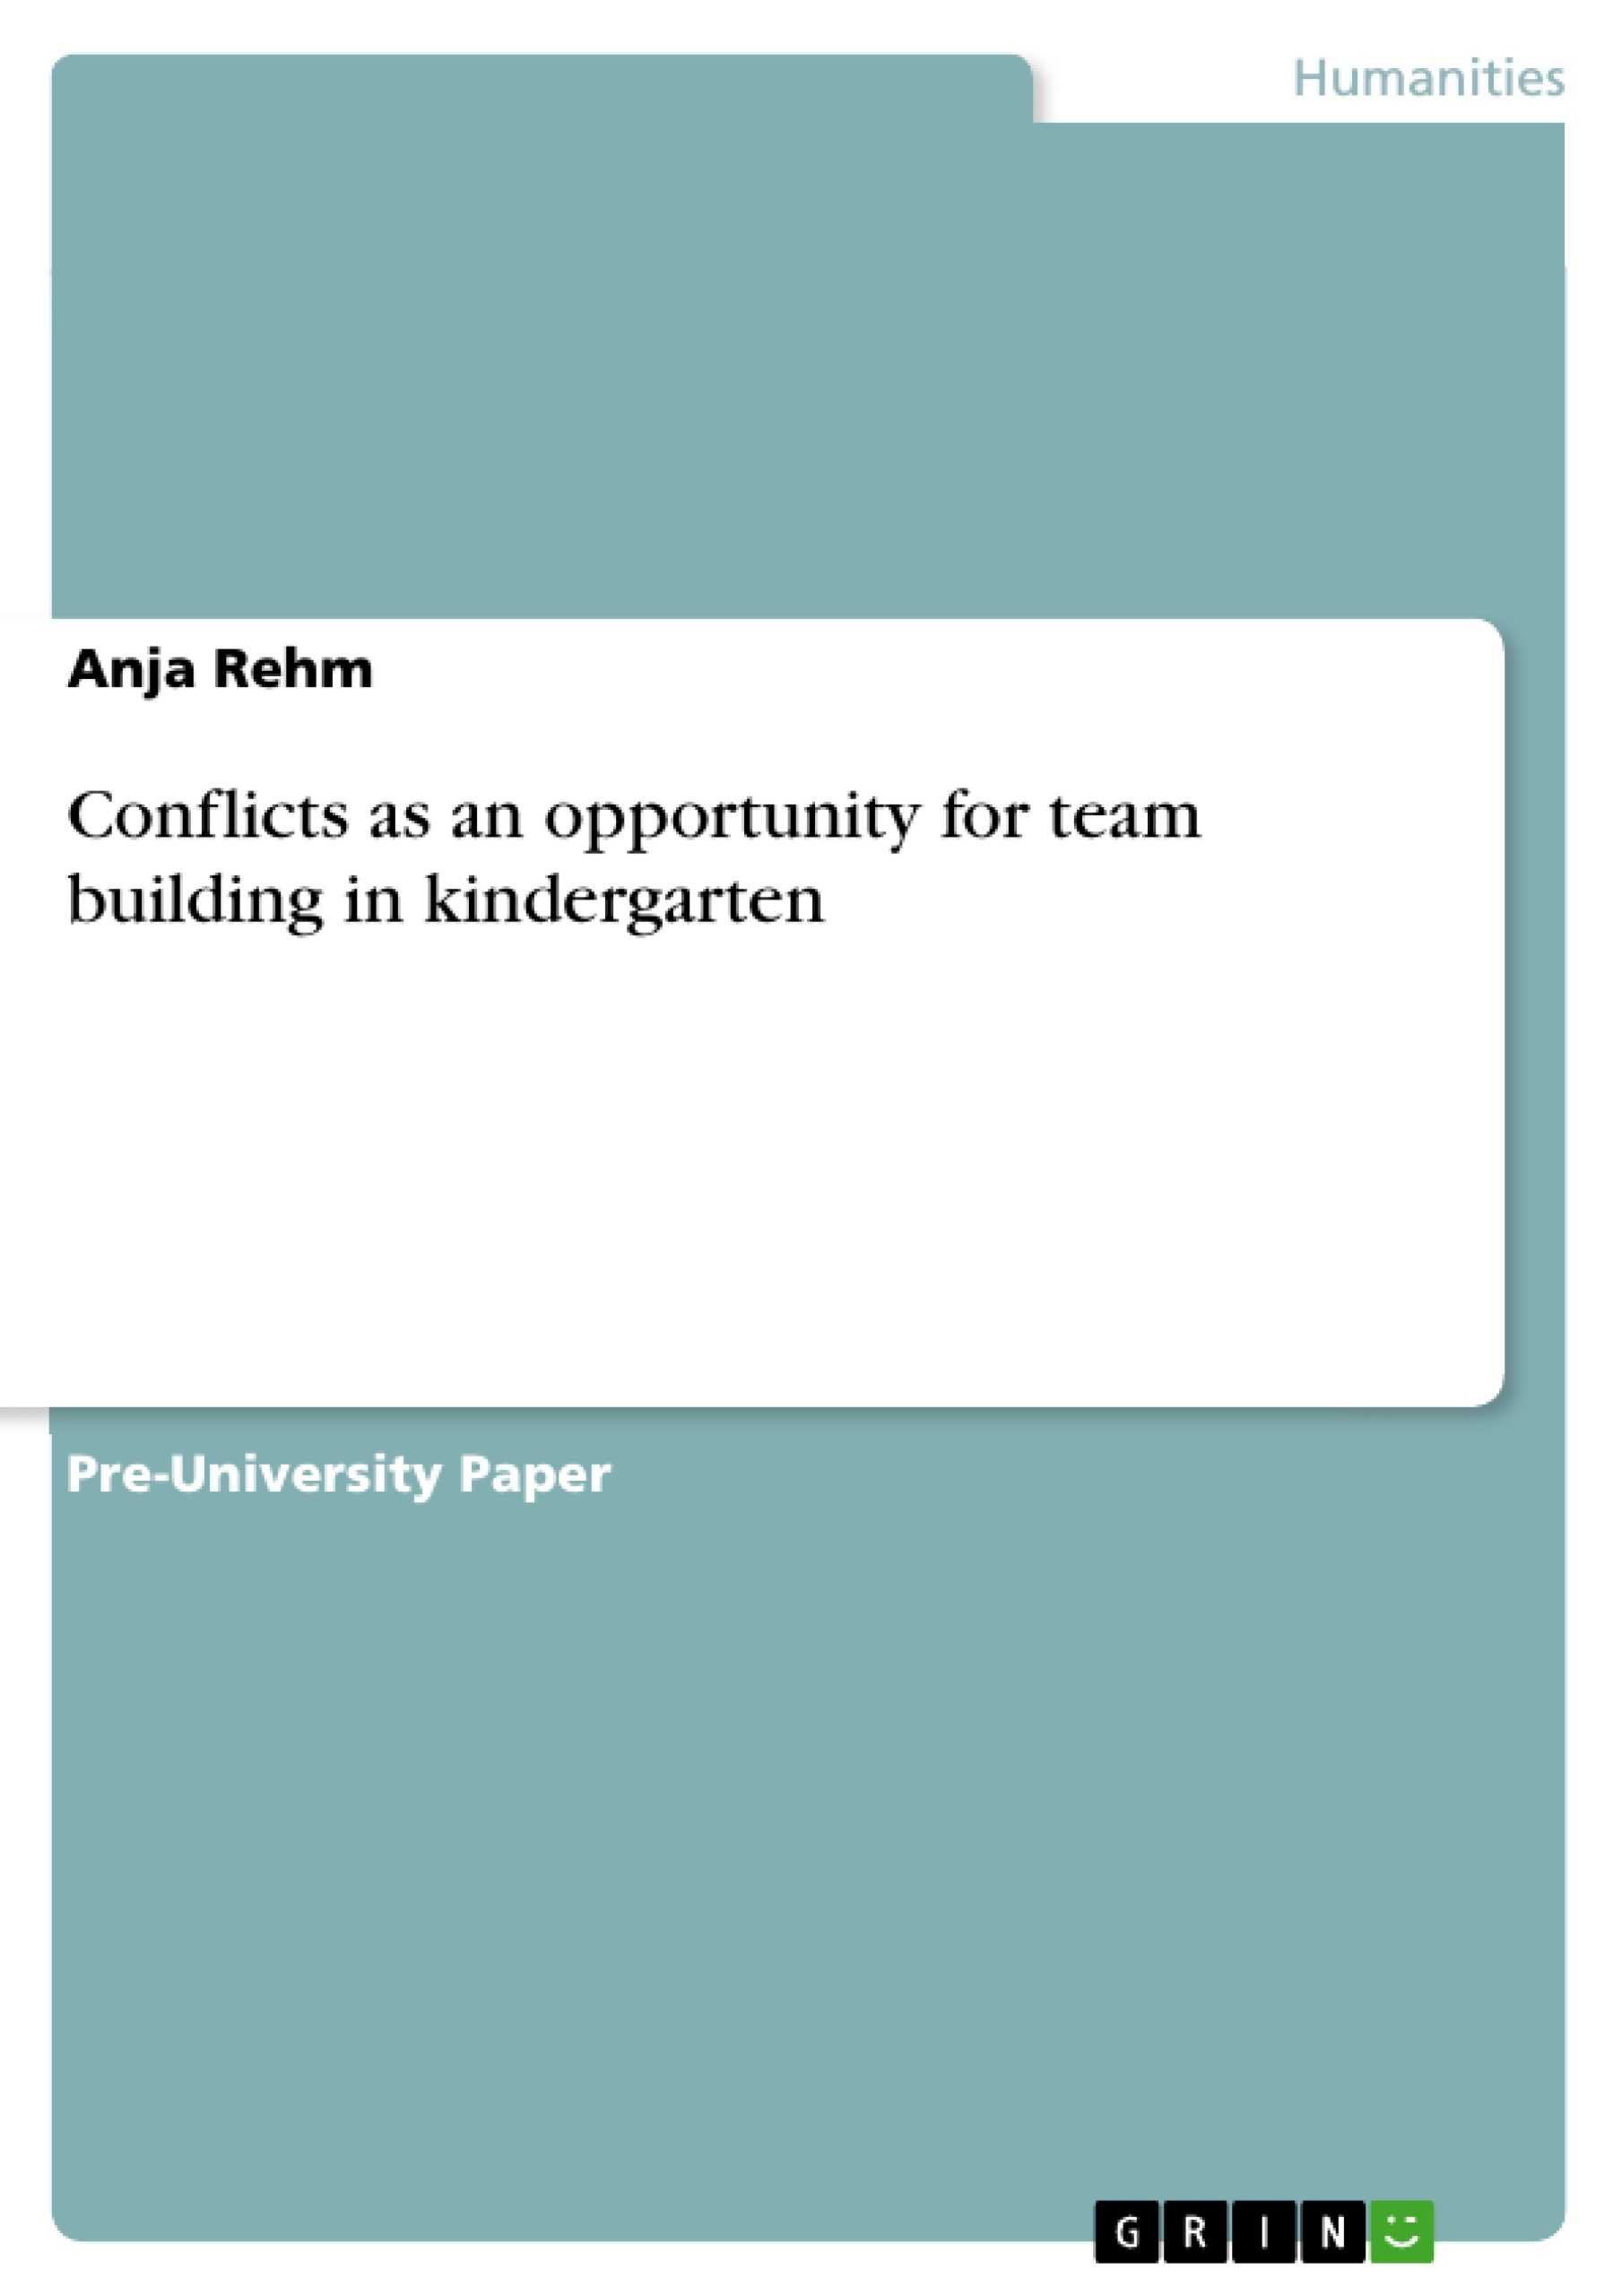 Titre: Conflicts as an opportunity for team building in kindergarten